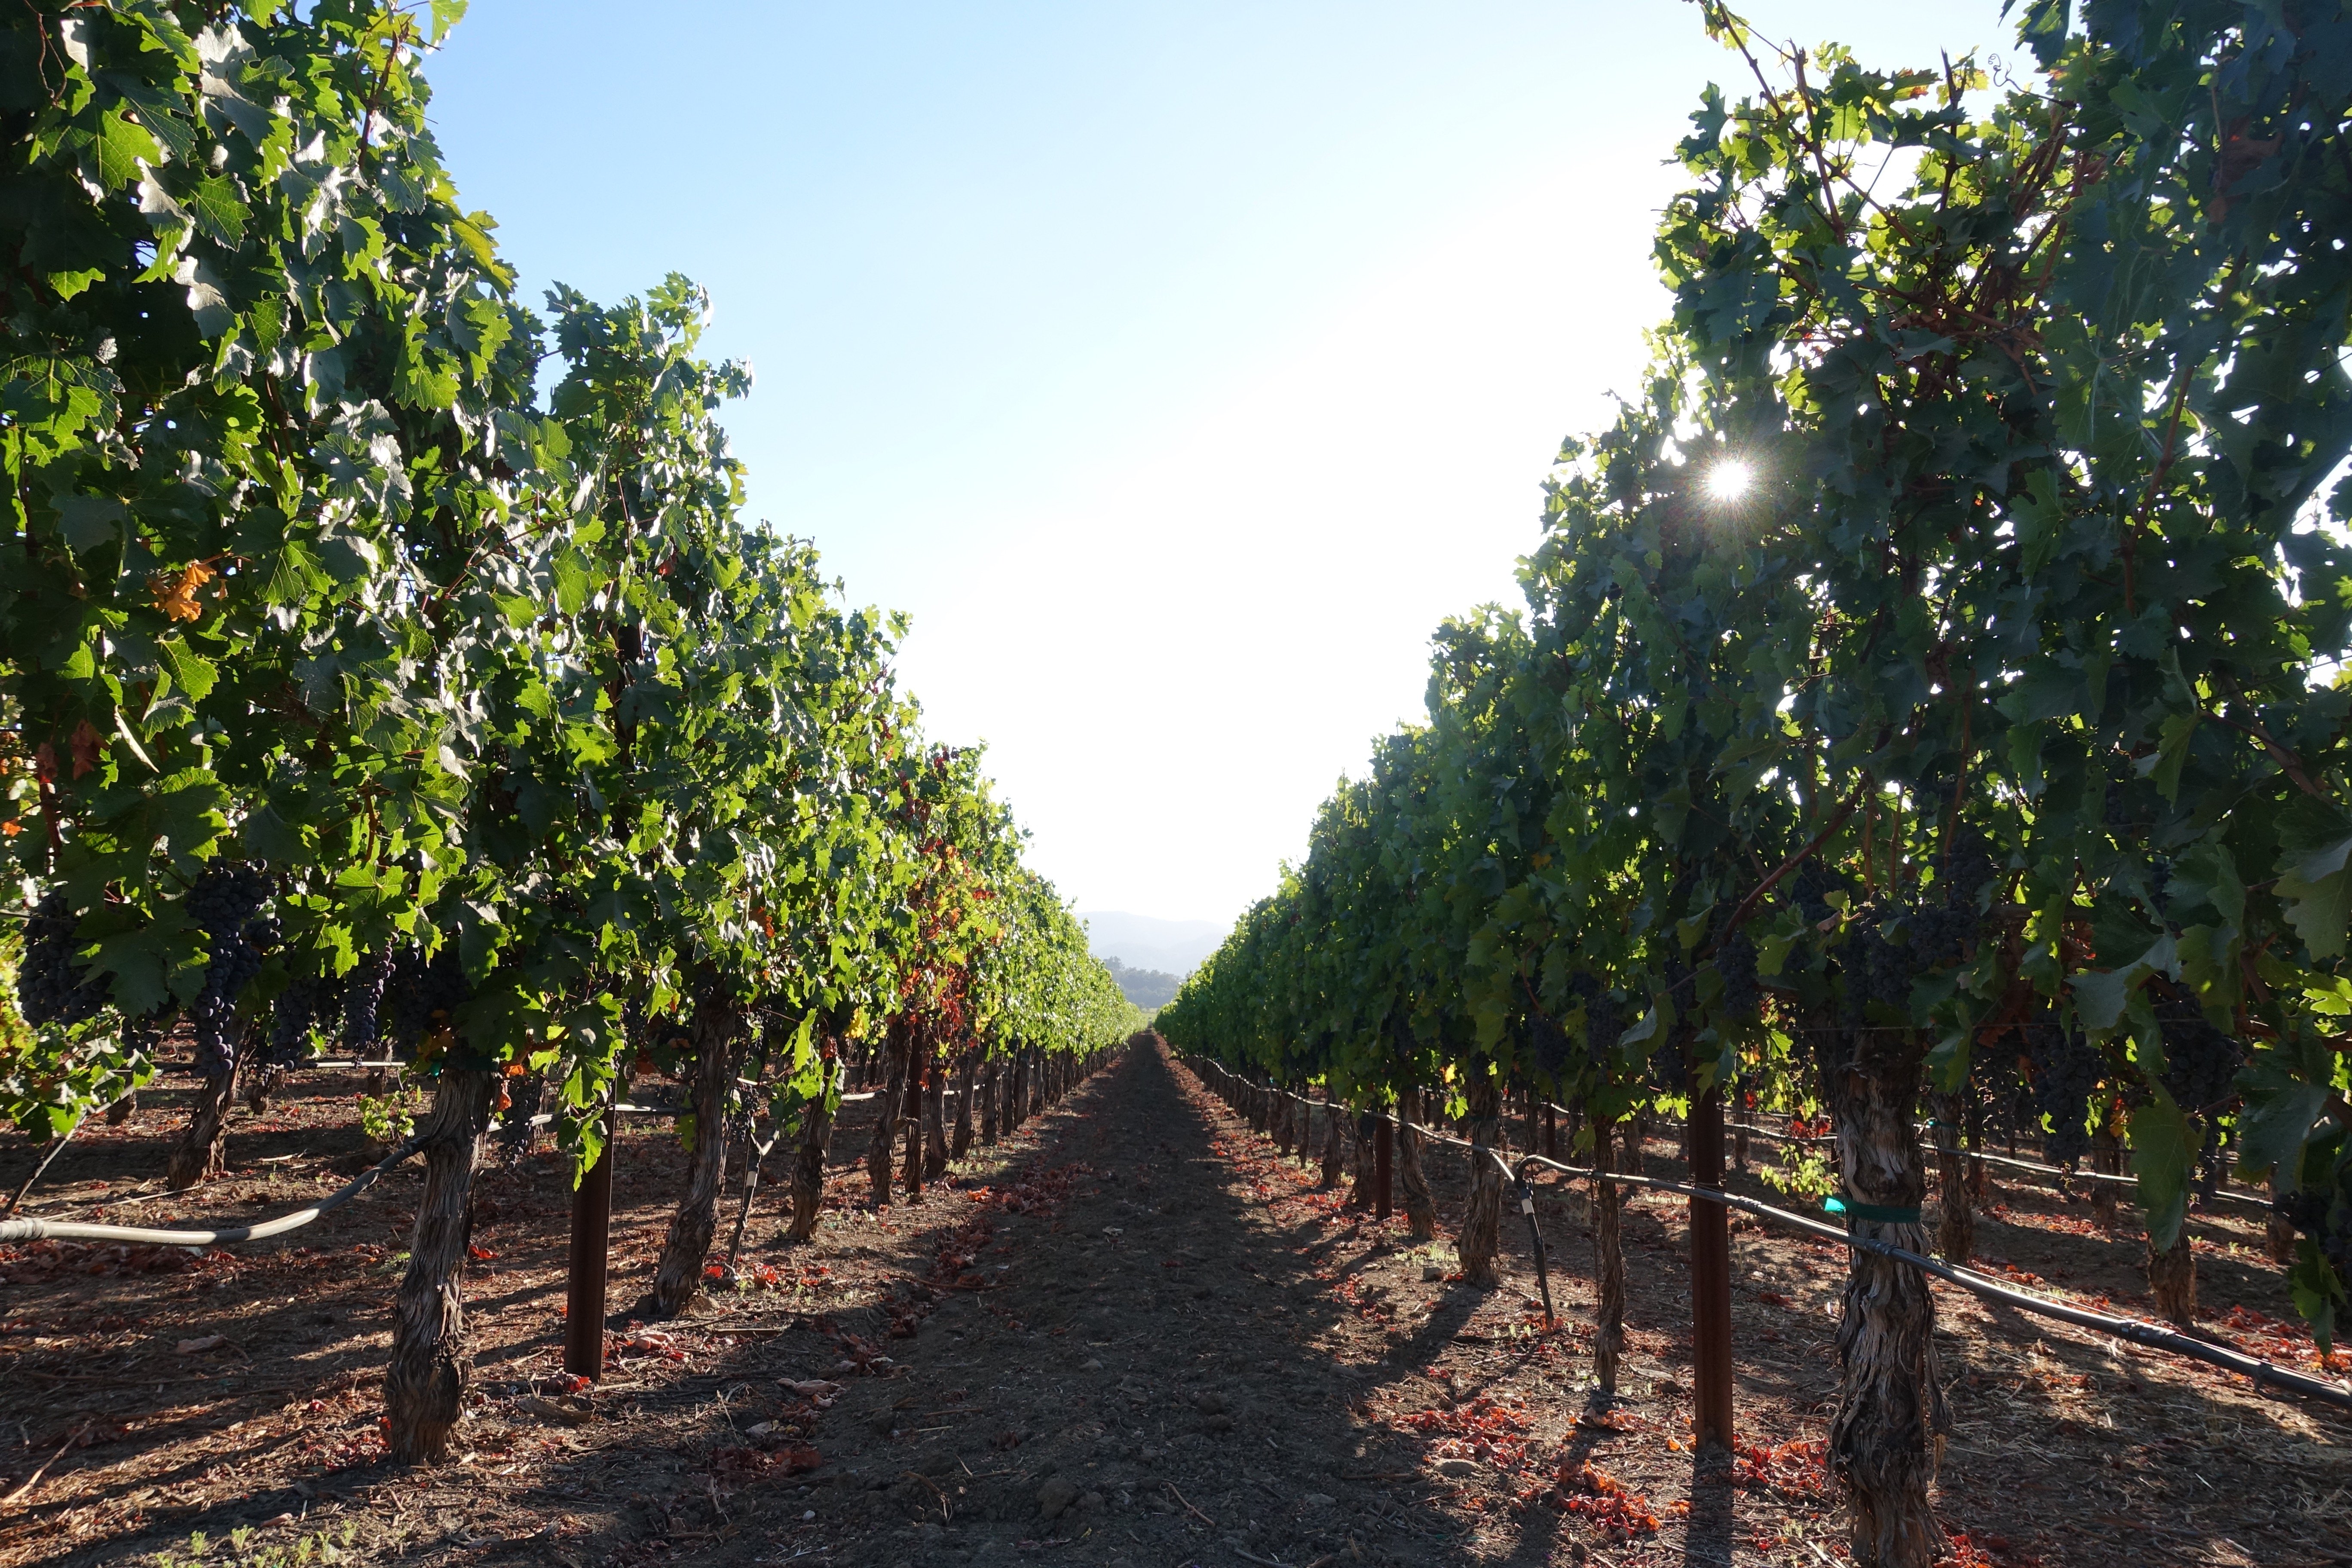 Rows of wine grapes extending down a vineyard.